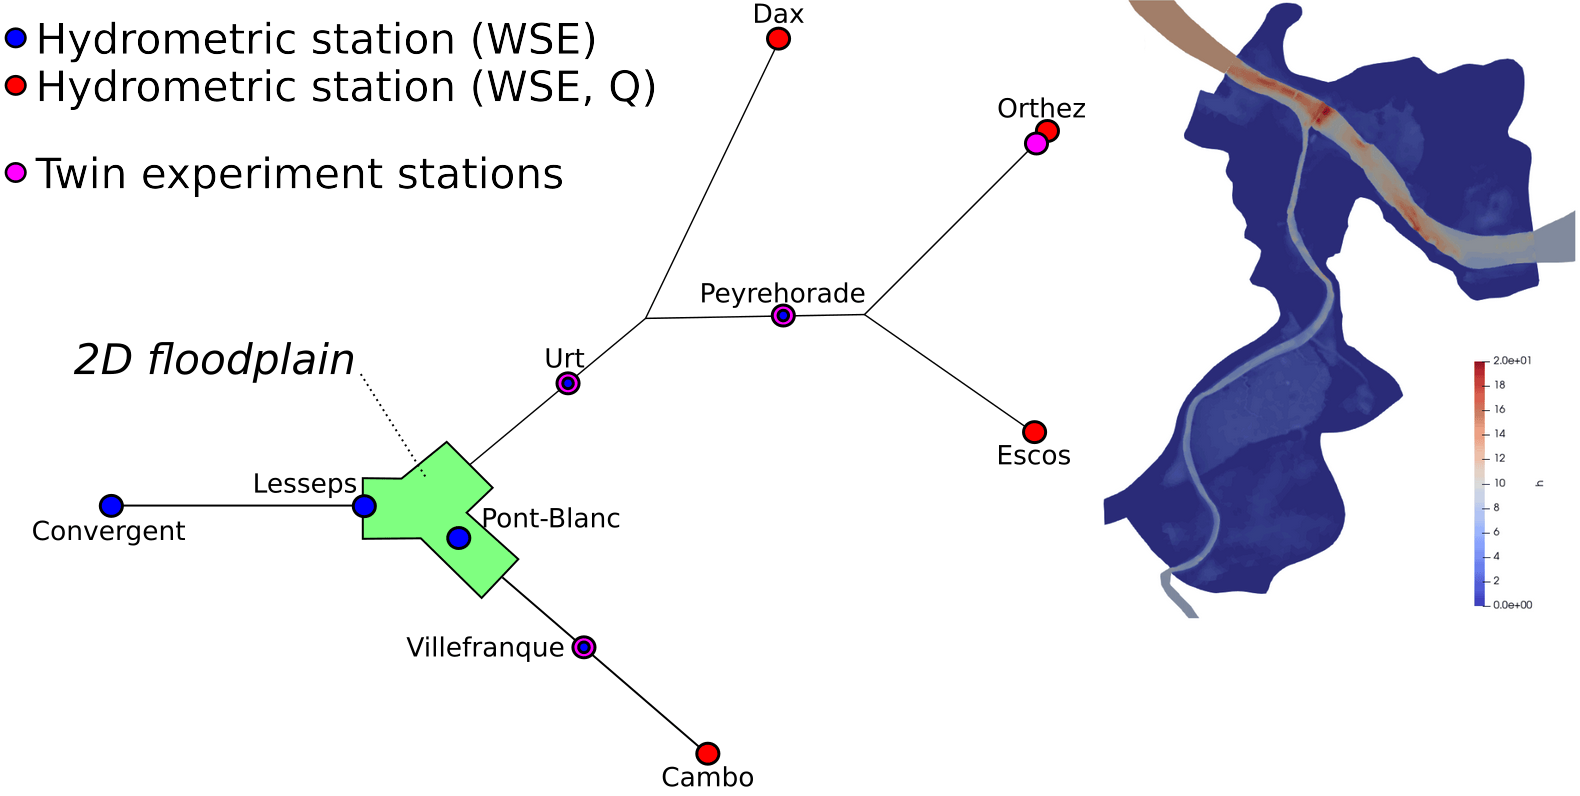 gmd network (left) and Bayonne zoom (right)